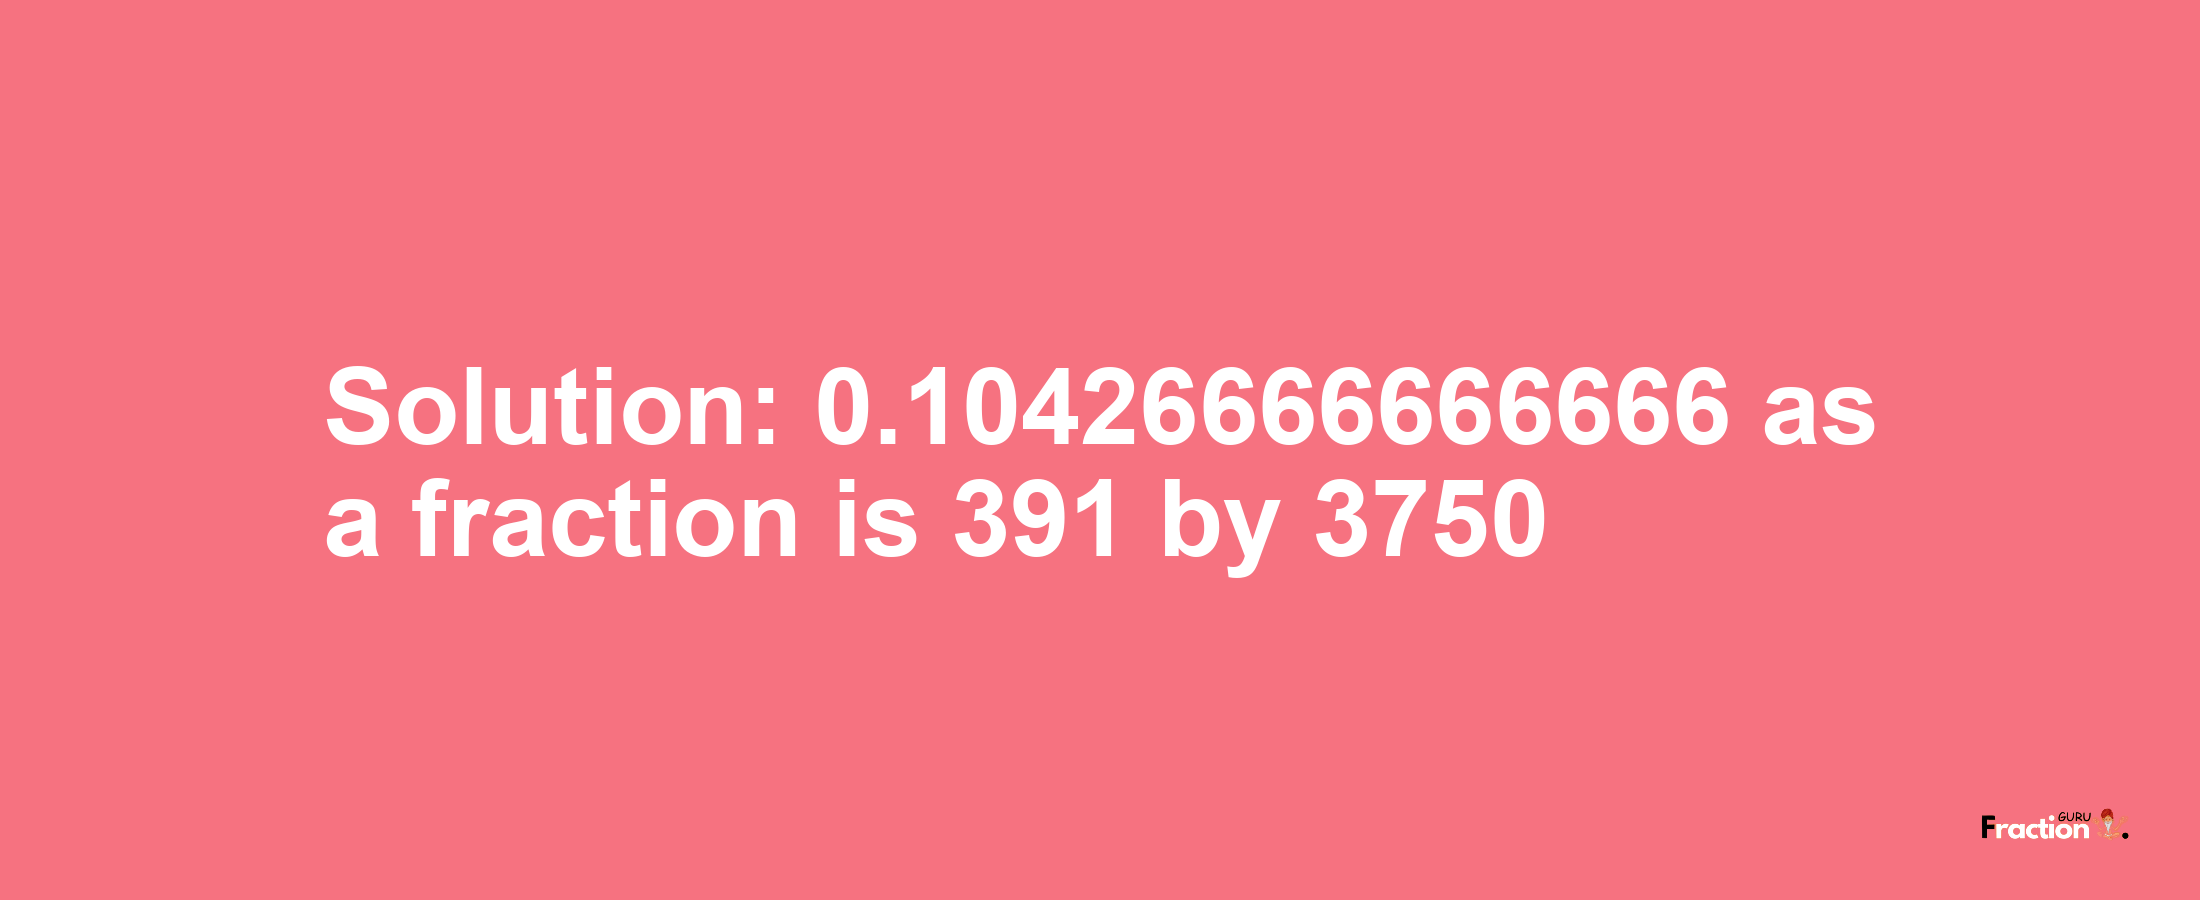 Solution:0.10426666666666 as a fraction is 391/3750